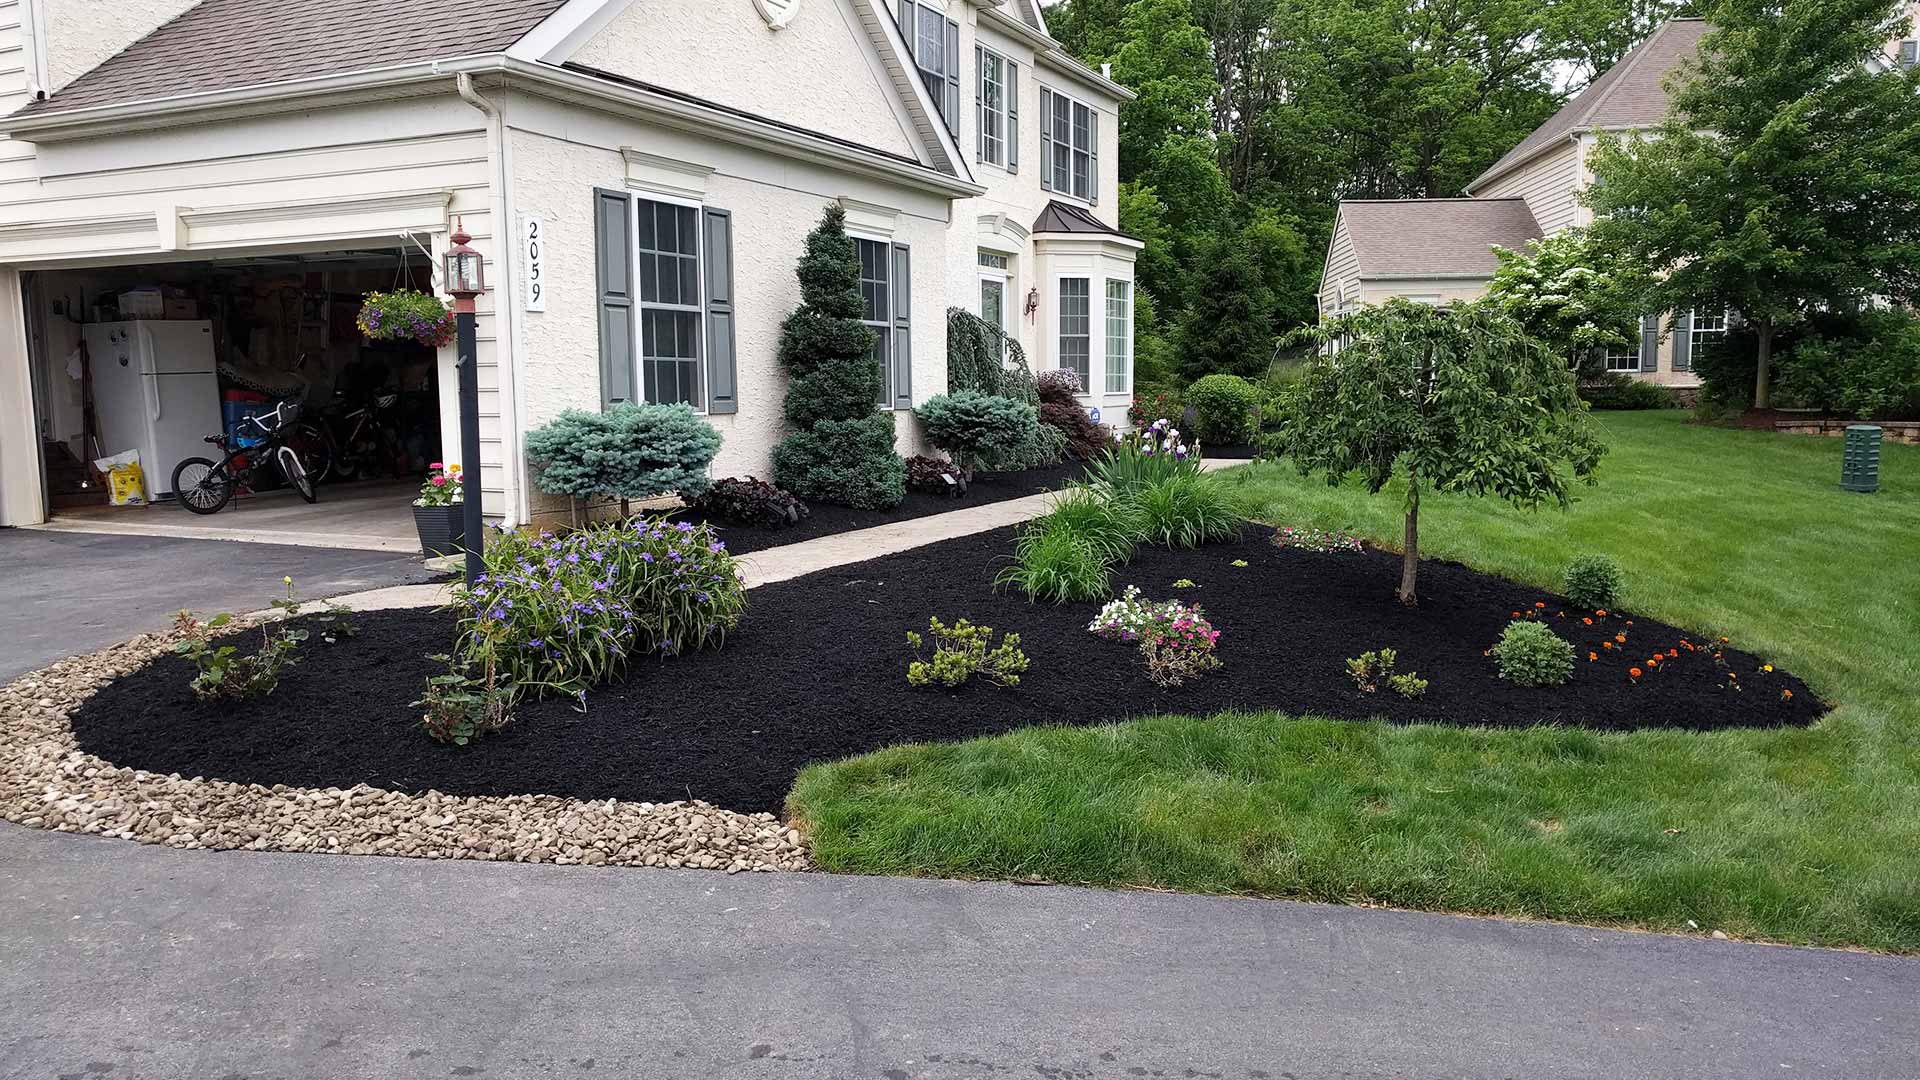 Well maintained landscape bed at a home in Zionsville, PA.